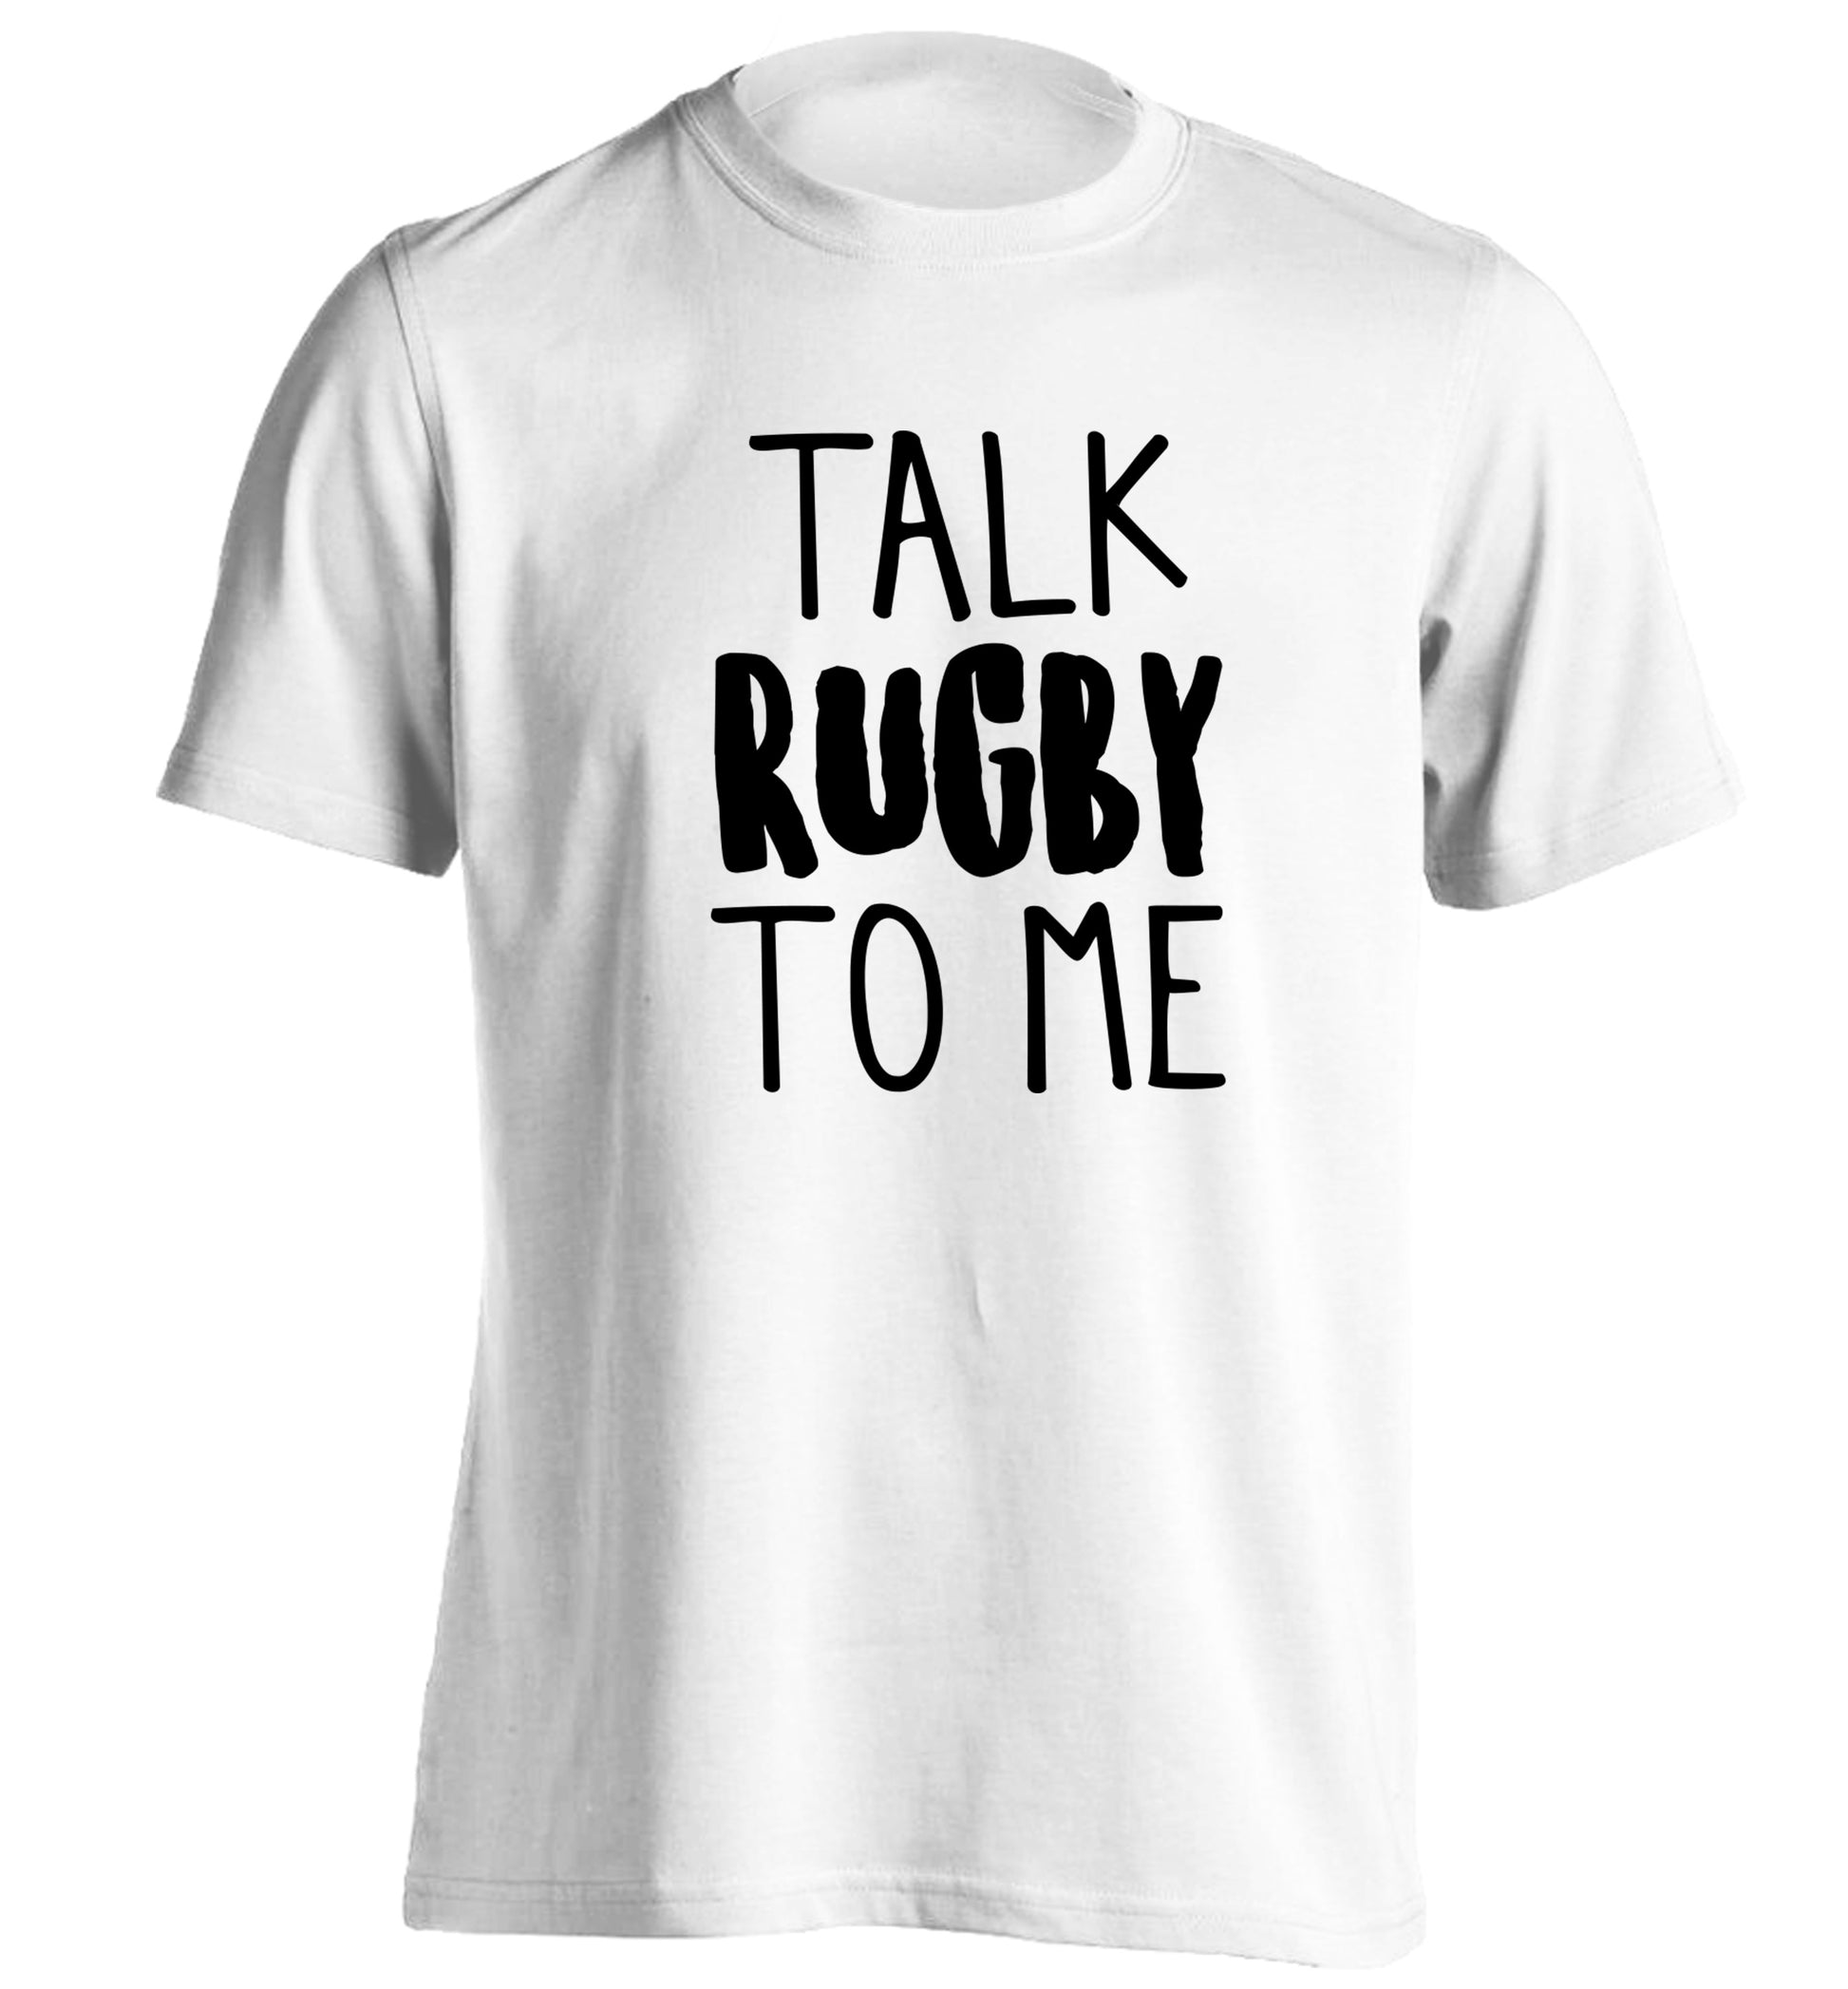 Talk rugby to me adults unisex white Tshirt 2XL